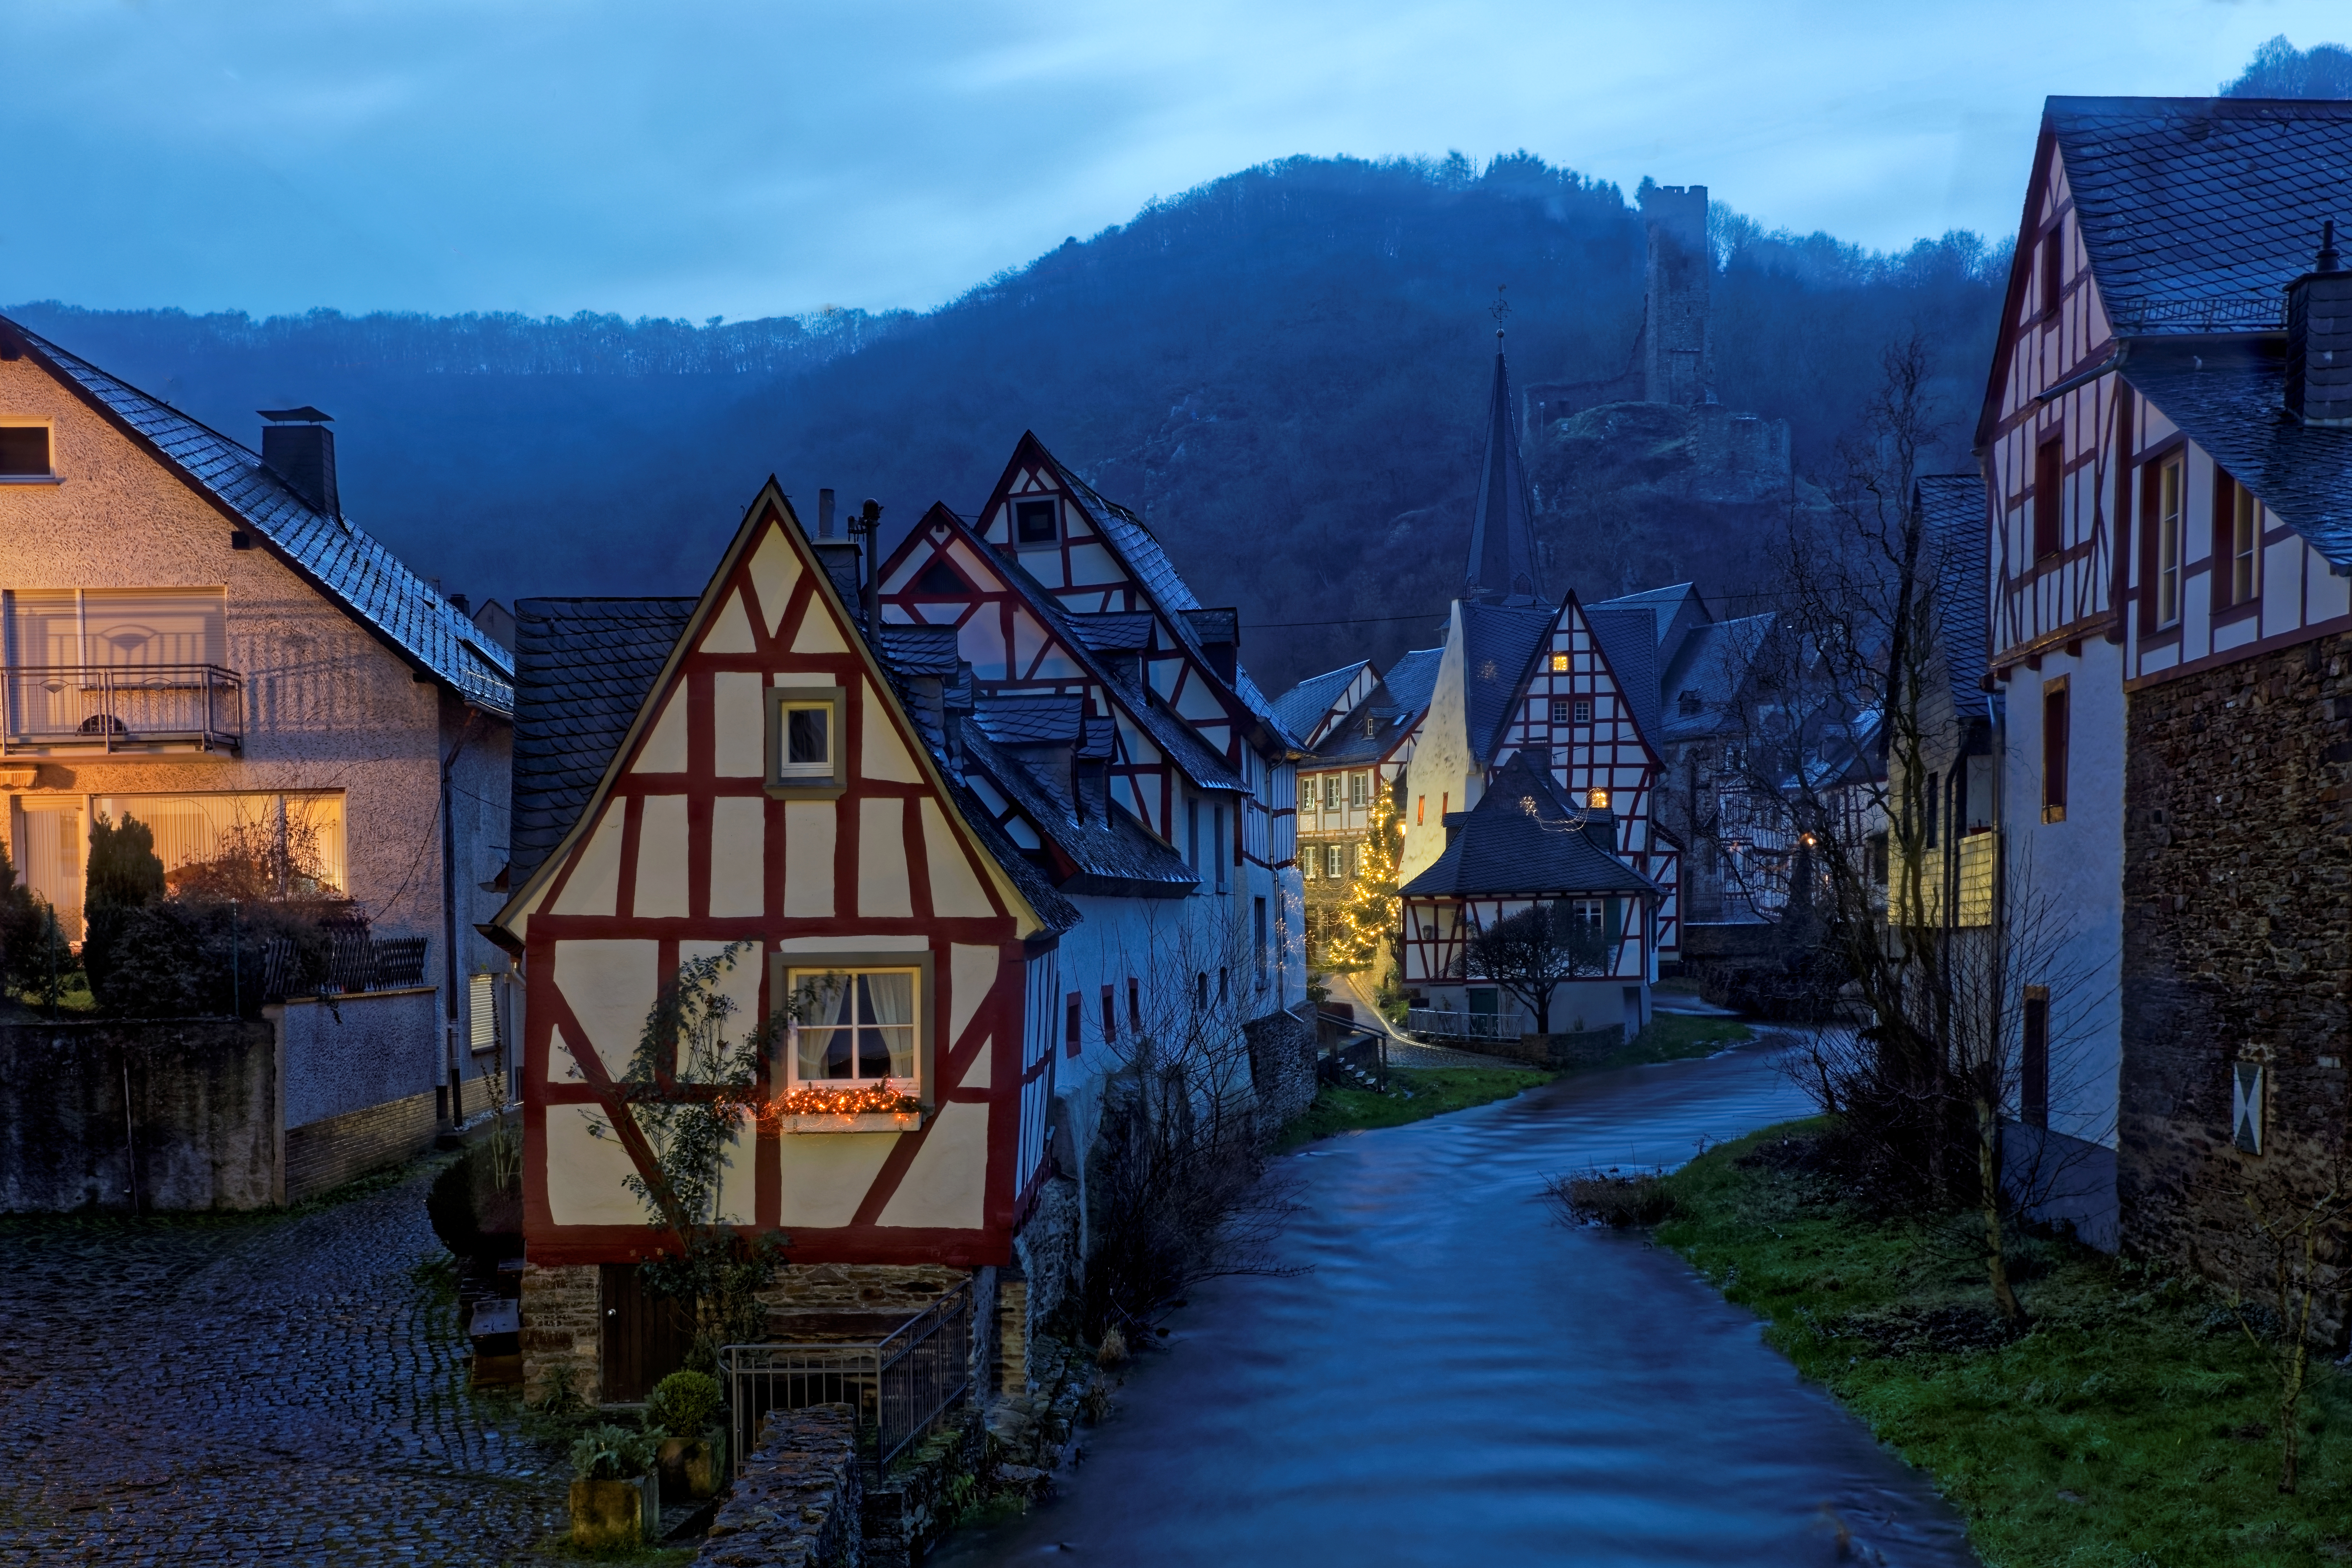 Wallpaper Full HD germany, man made, village, architecture, dusk, house